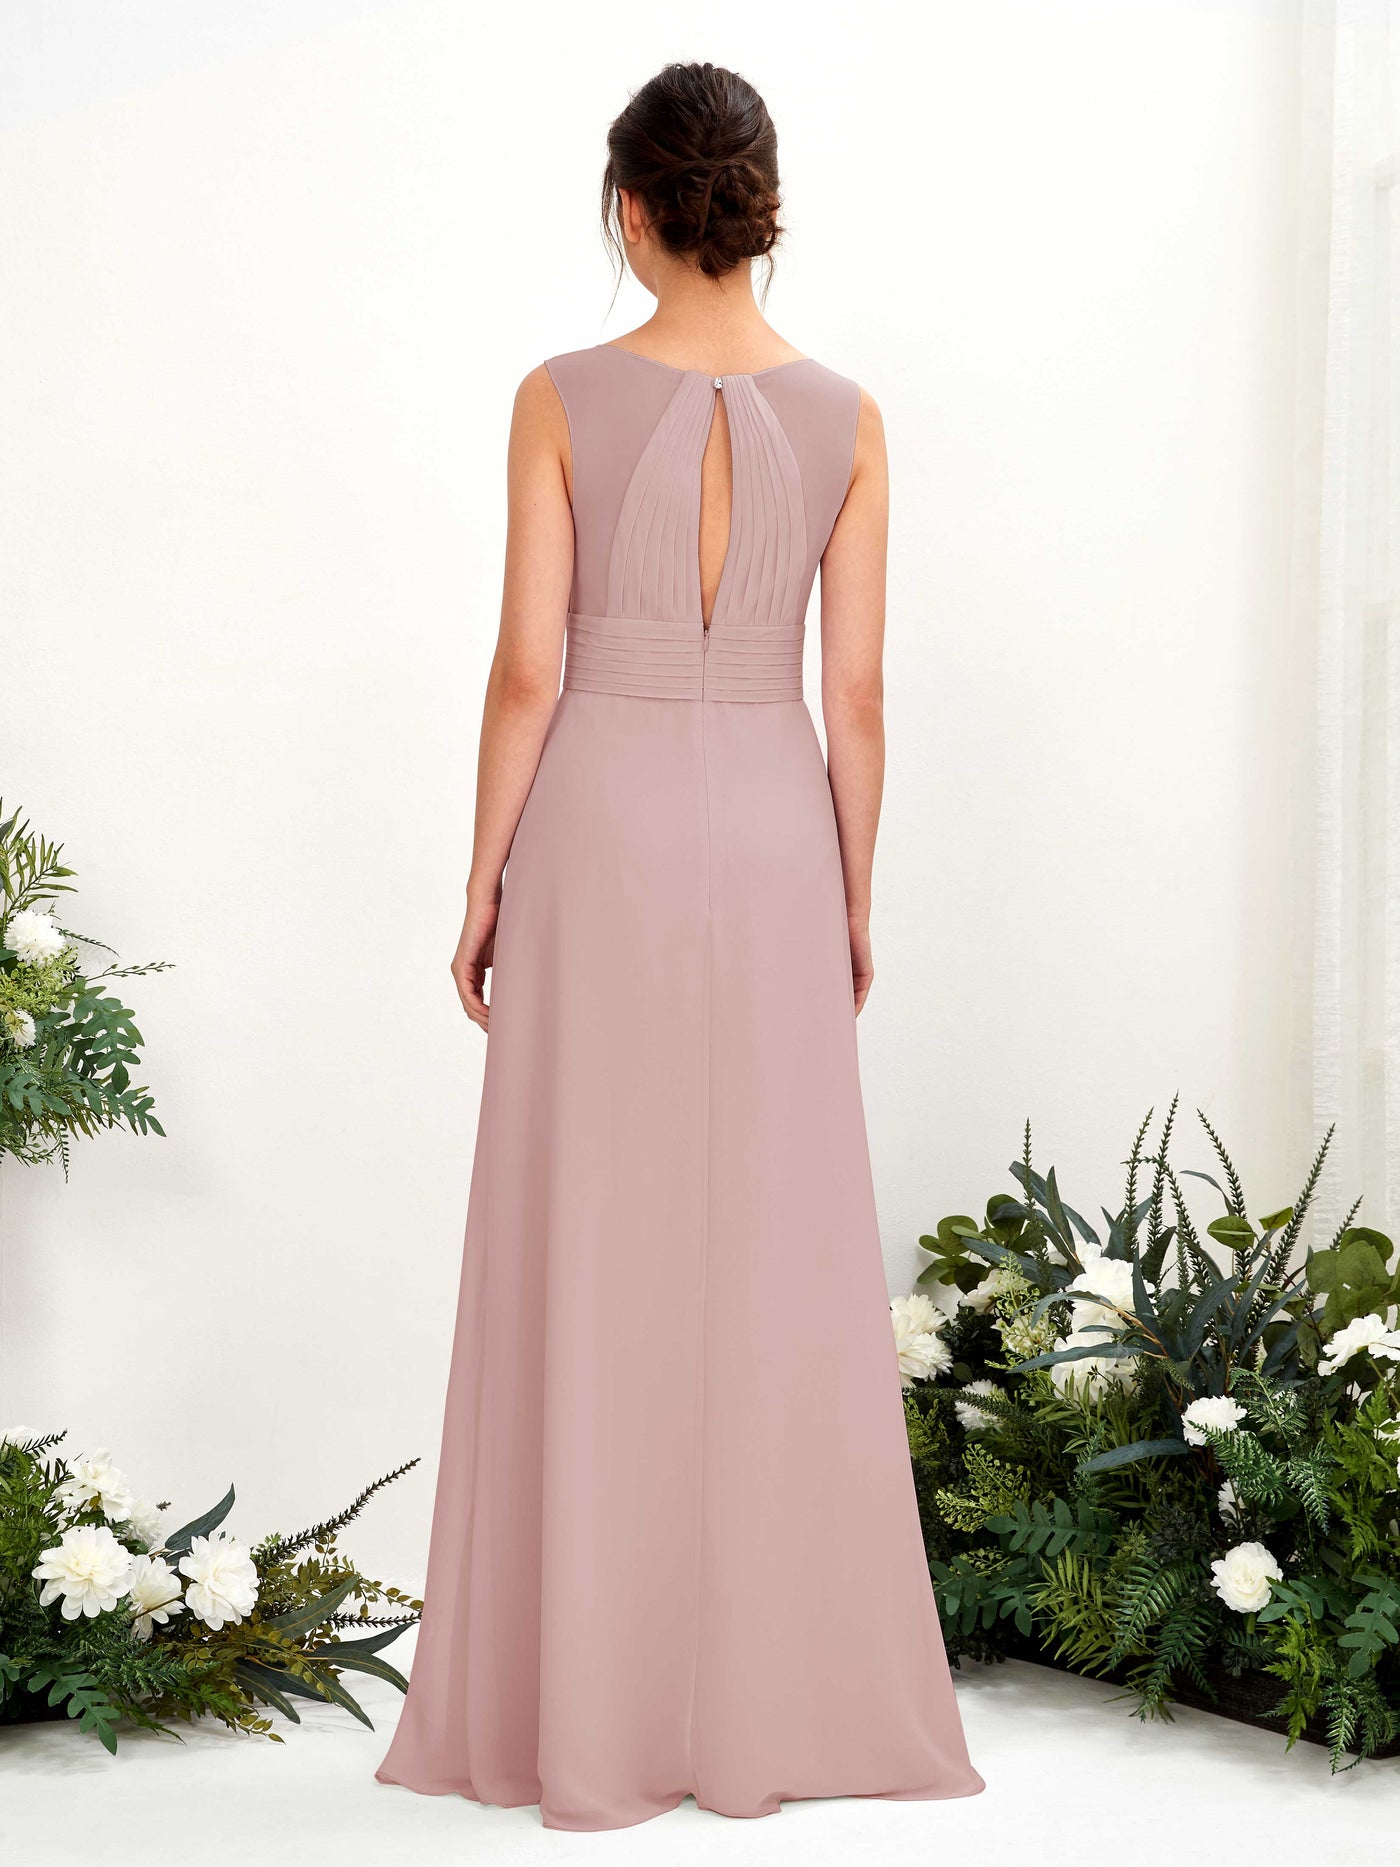 Dusty Rose Bridesmaid Dresses Bridesmaid Dress A-line Chiffon Straps Full Length Sleeveless Wedding Party Dress (81220909)#color_dusty-rose